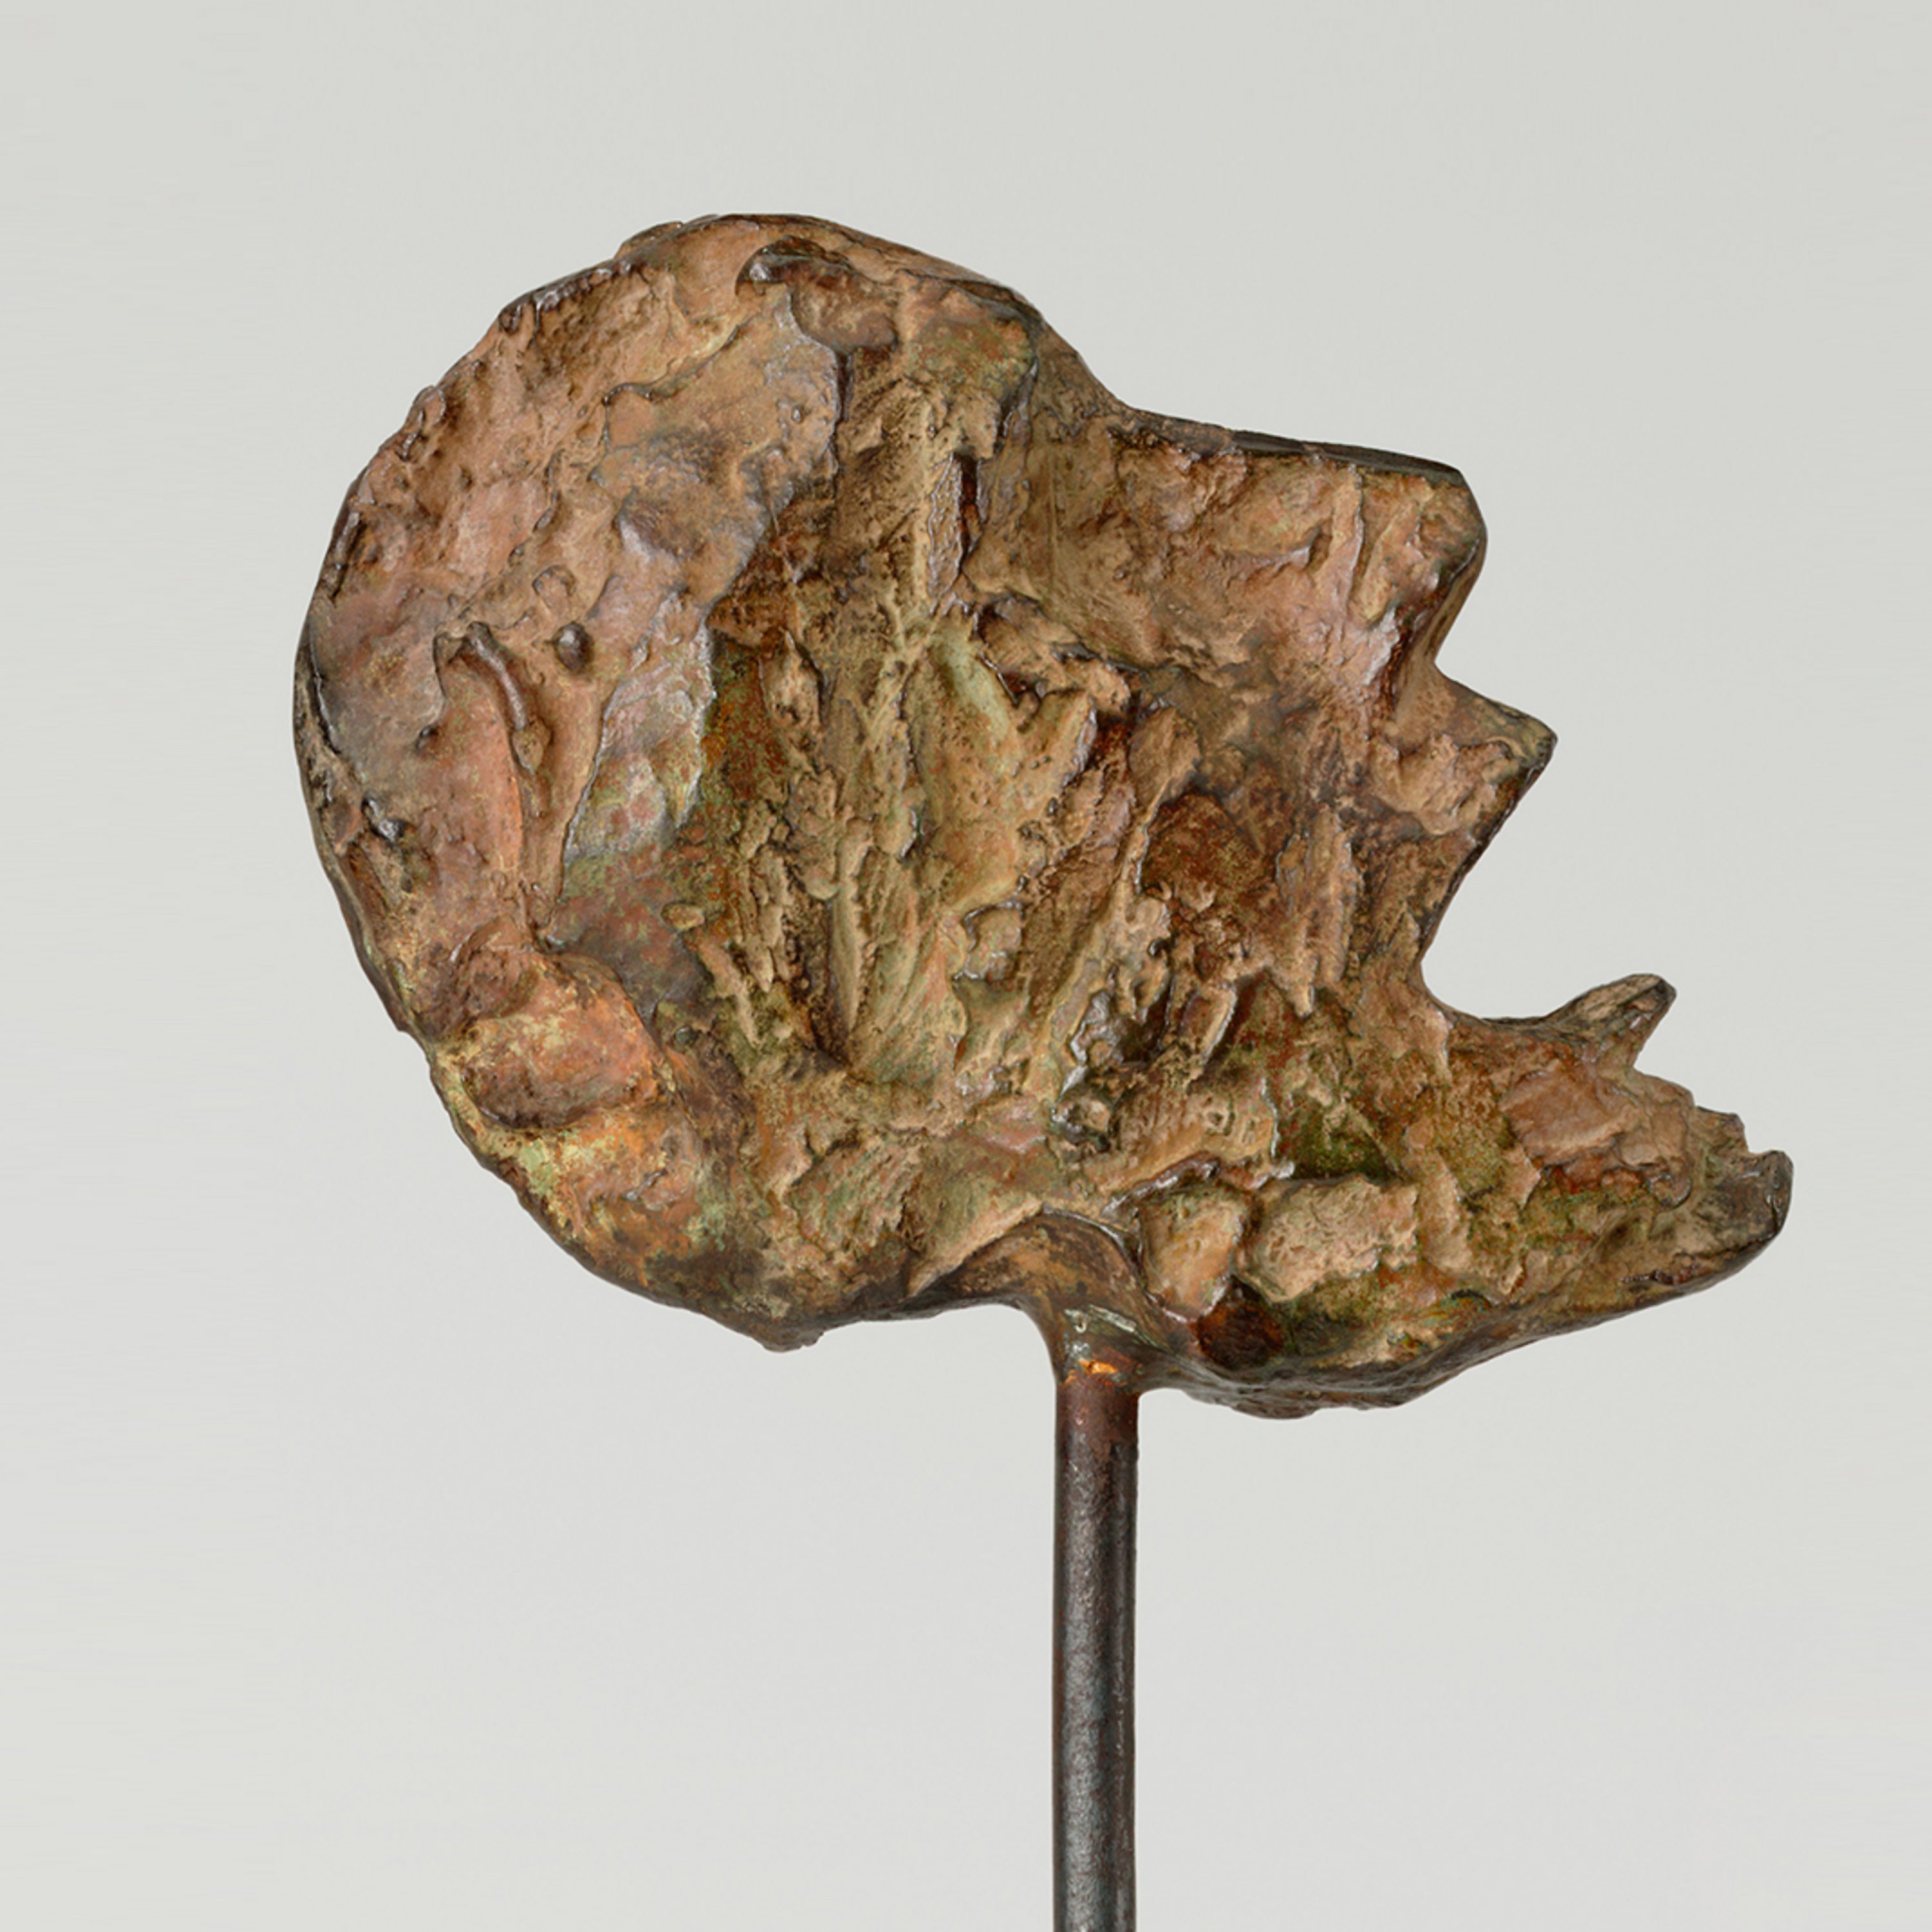 Stanley Tucci and Giacometti's Head of a Man on a Rod